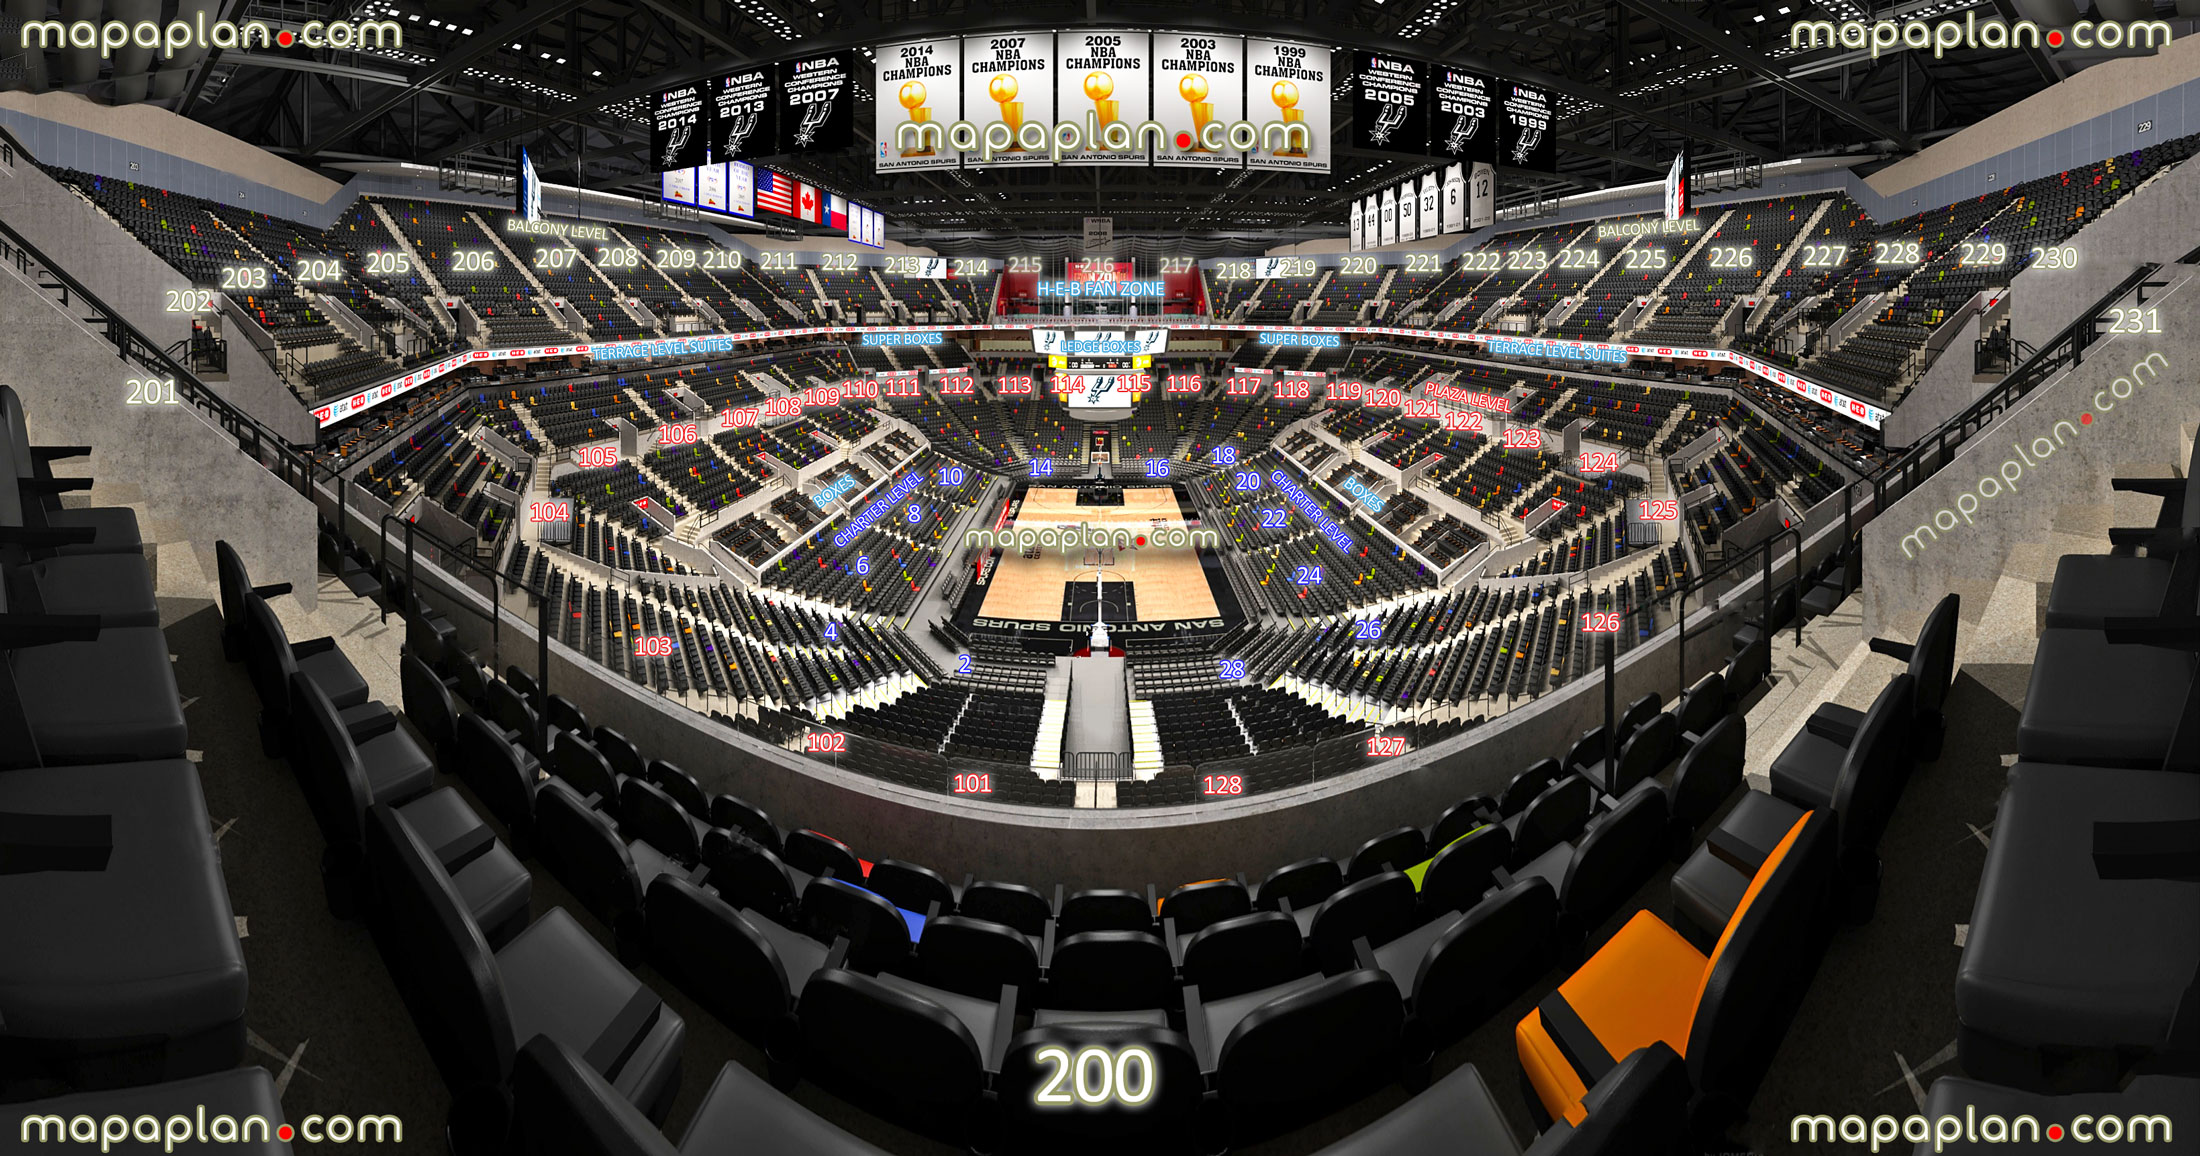 view section 200 row 5 seat 8 spurs silver stars basketball best seat selection information guide virtual interactive image map balcony level sections 200 201 202 203 204 205 206 207 208 209 210 211 212 213 214 215 216 217 218 219 220 221 222 223 224 225 226 227 228 229 230 231 San Antonio AT&T Center seating chart